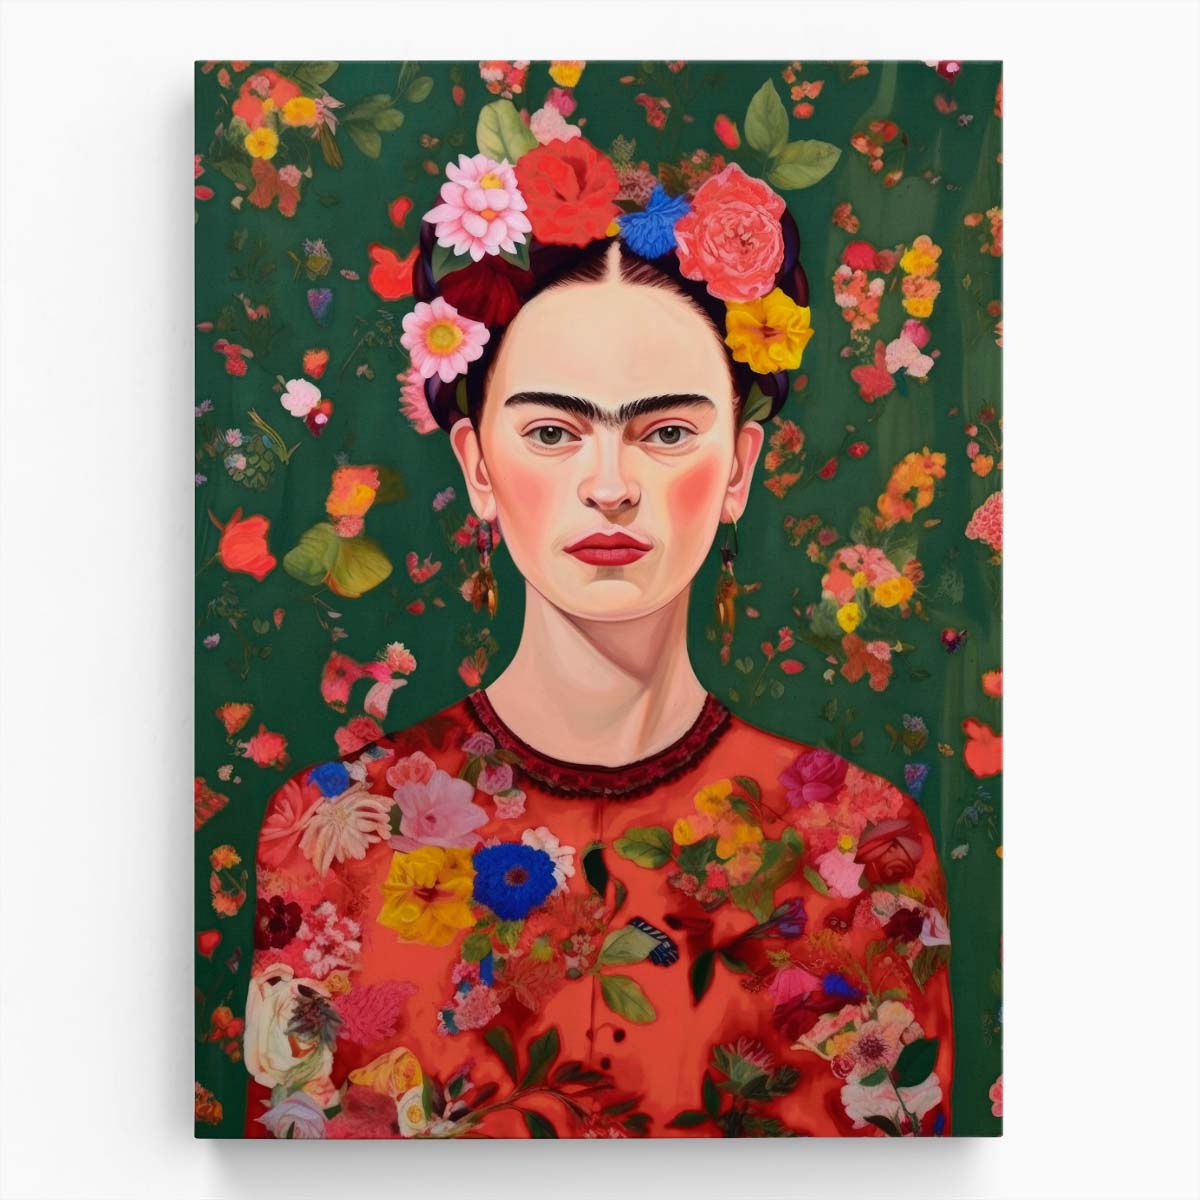 Colorful Frida Kahlo Floral Portrait Illustration by Treechild by Luxuriance Designs, made in USA